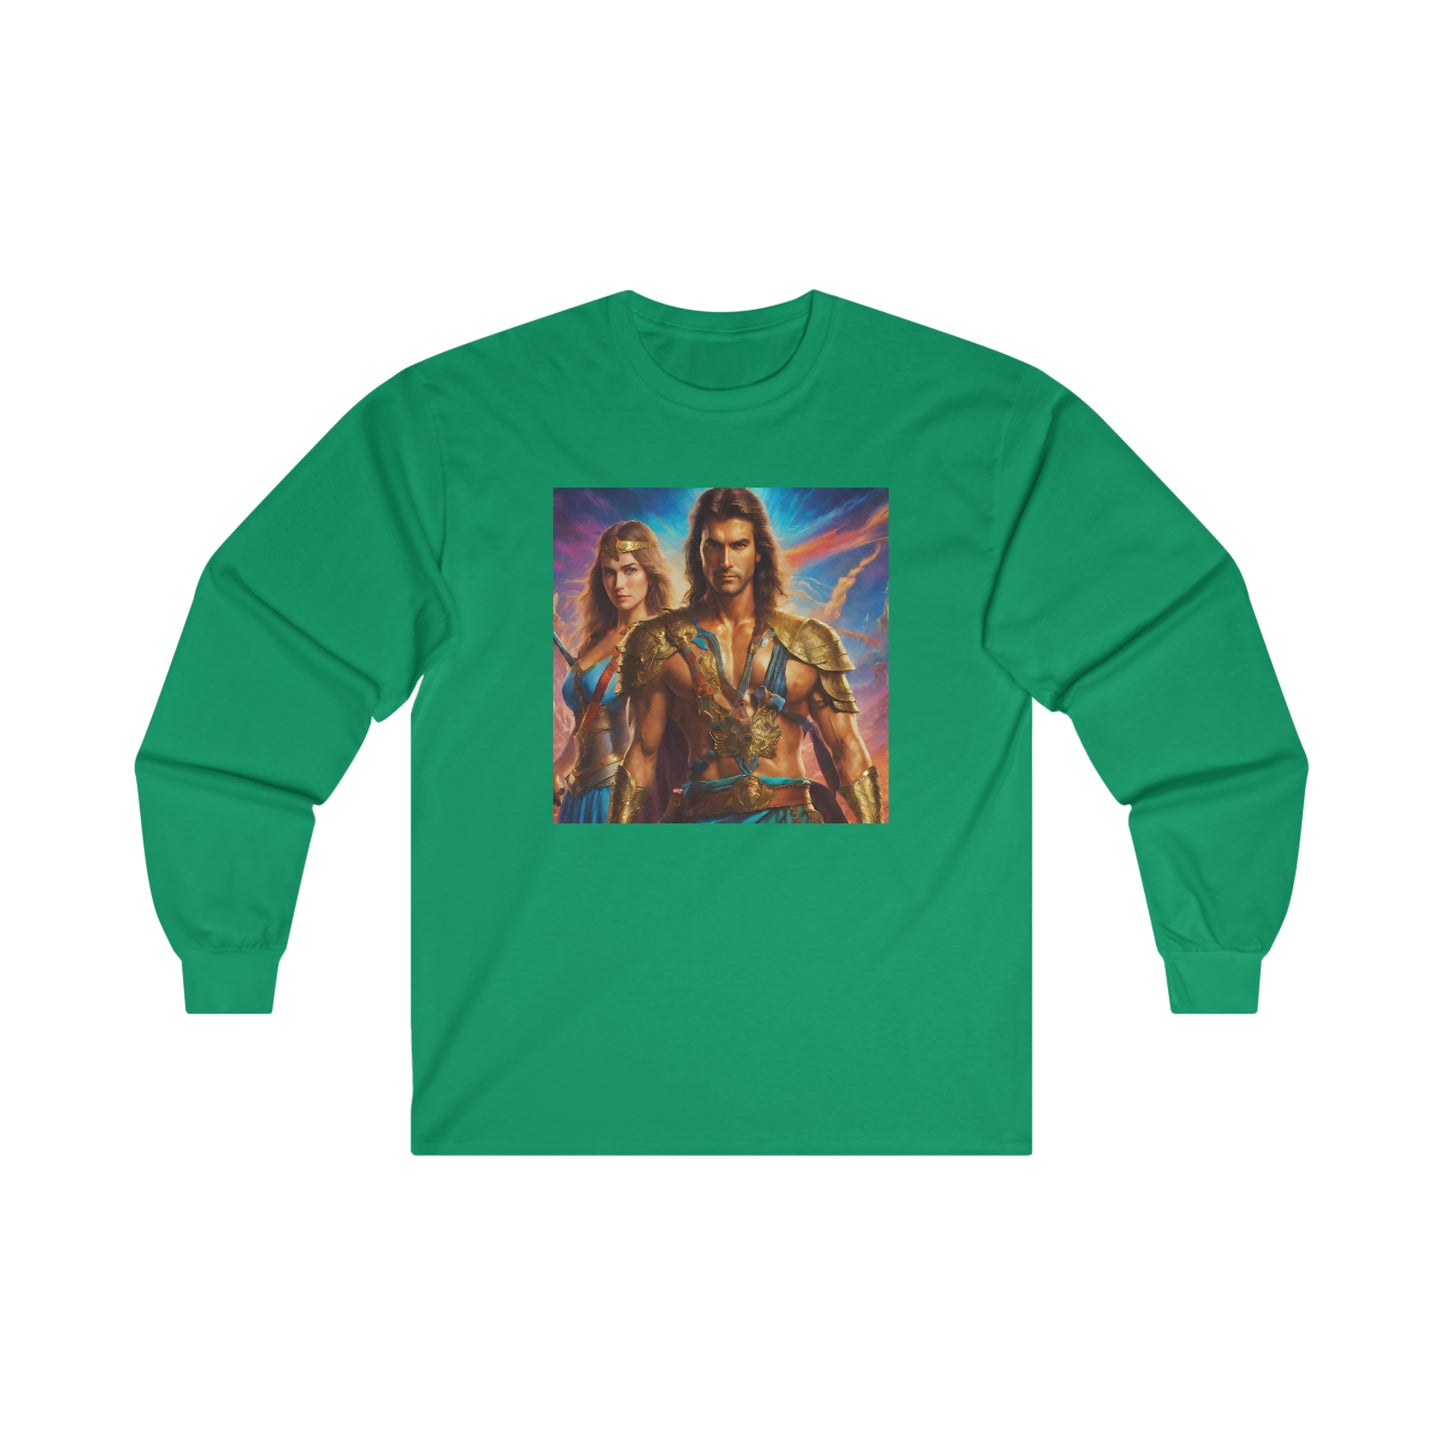 "80s medieval fantasy" Ultra Cotton Long Sleeve Tee